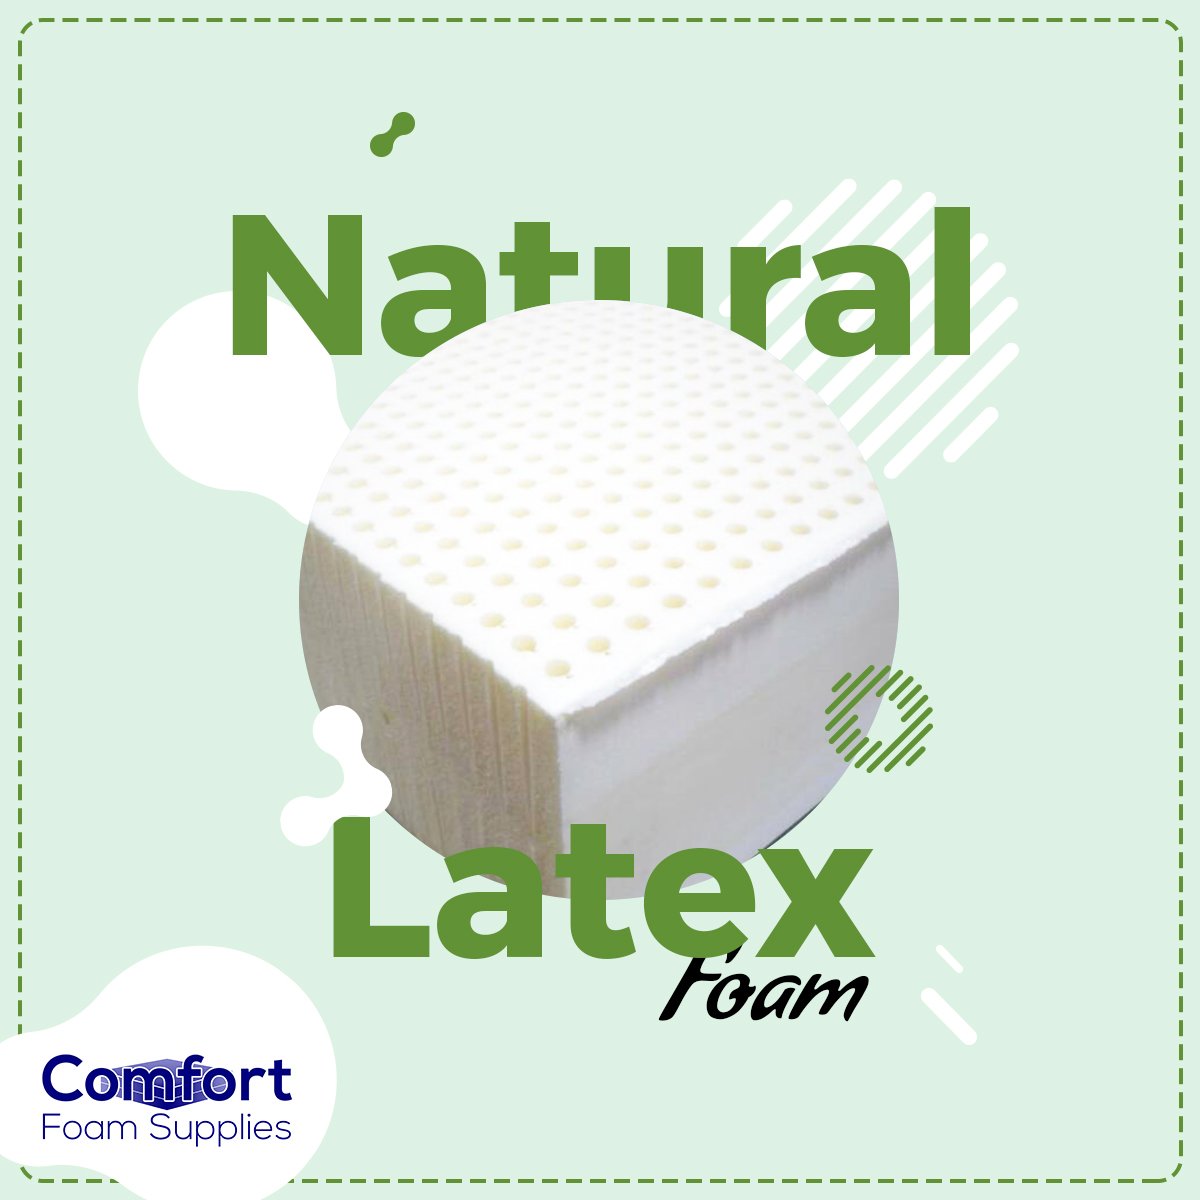 @CFoamSupplies provides the highest support to your back and neck with 100% #naturallatex.

Find more natural latex foam here at 954-496-8402 mydreamfoam.com 

#NaturalLatexMattress #LatexMattress #ComfortFoamSupplies #Foams #Natural #Latex #Foams #Foam